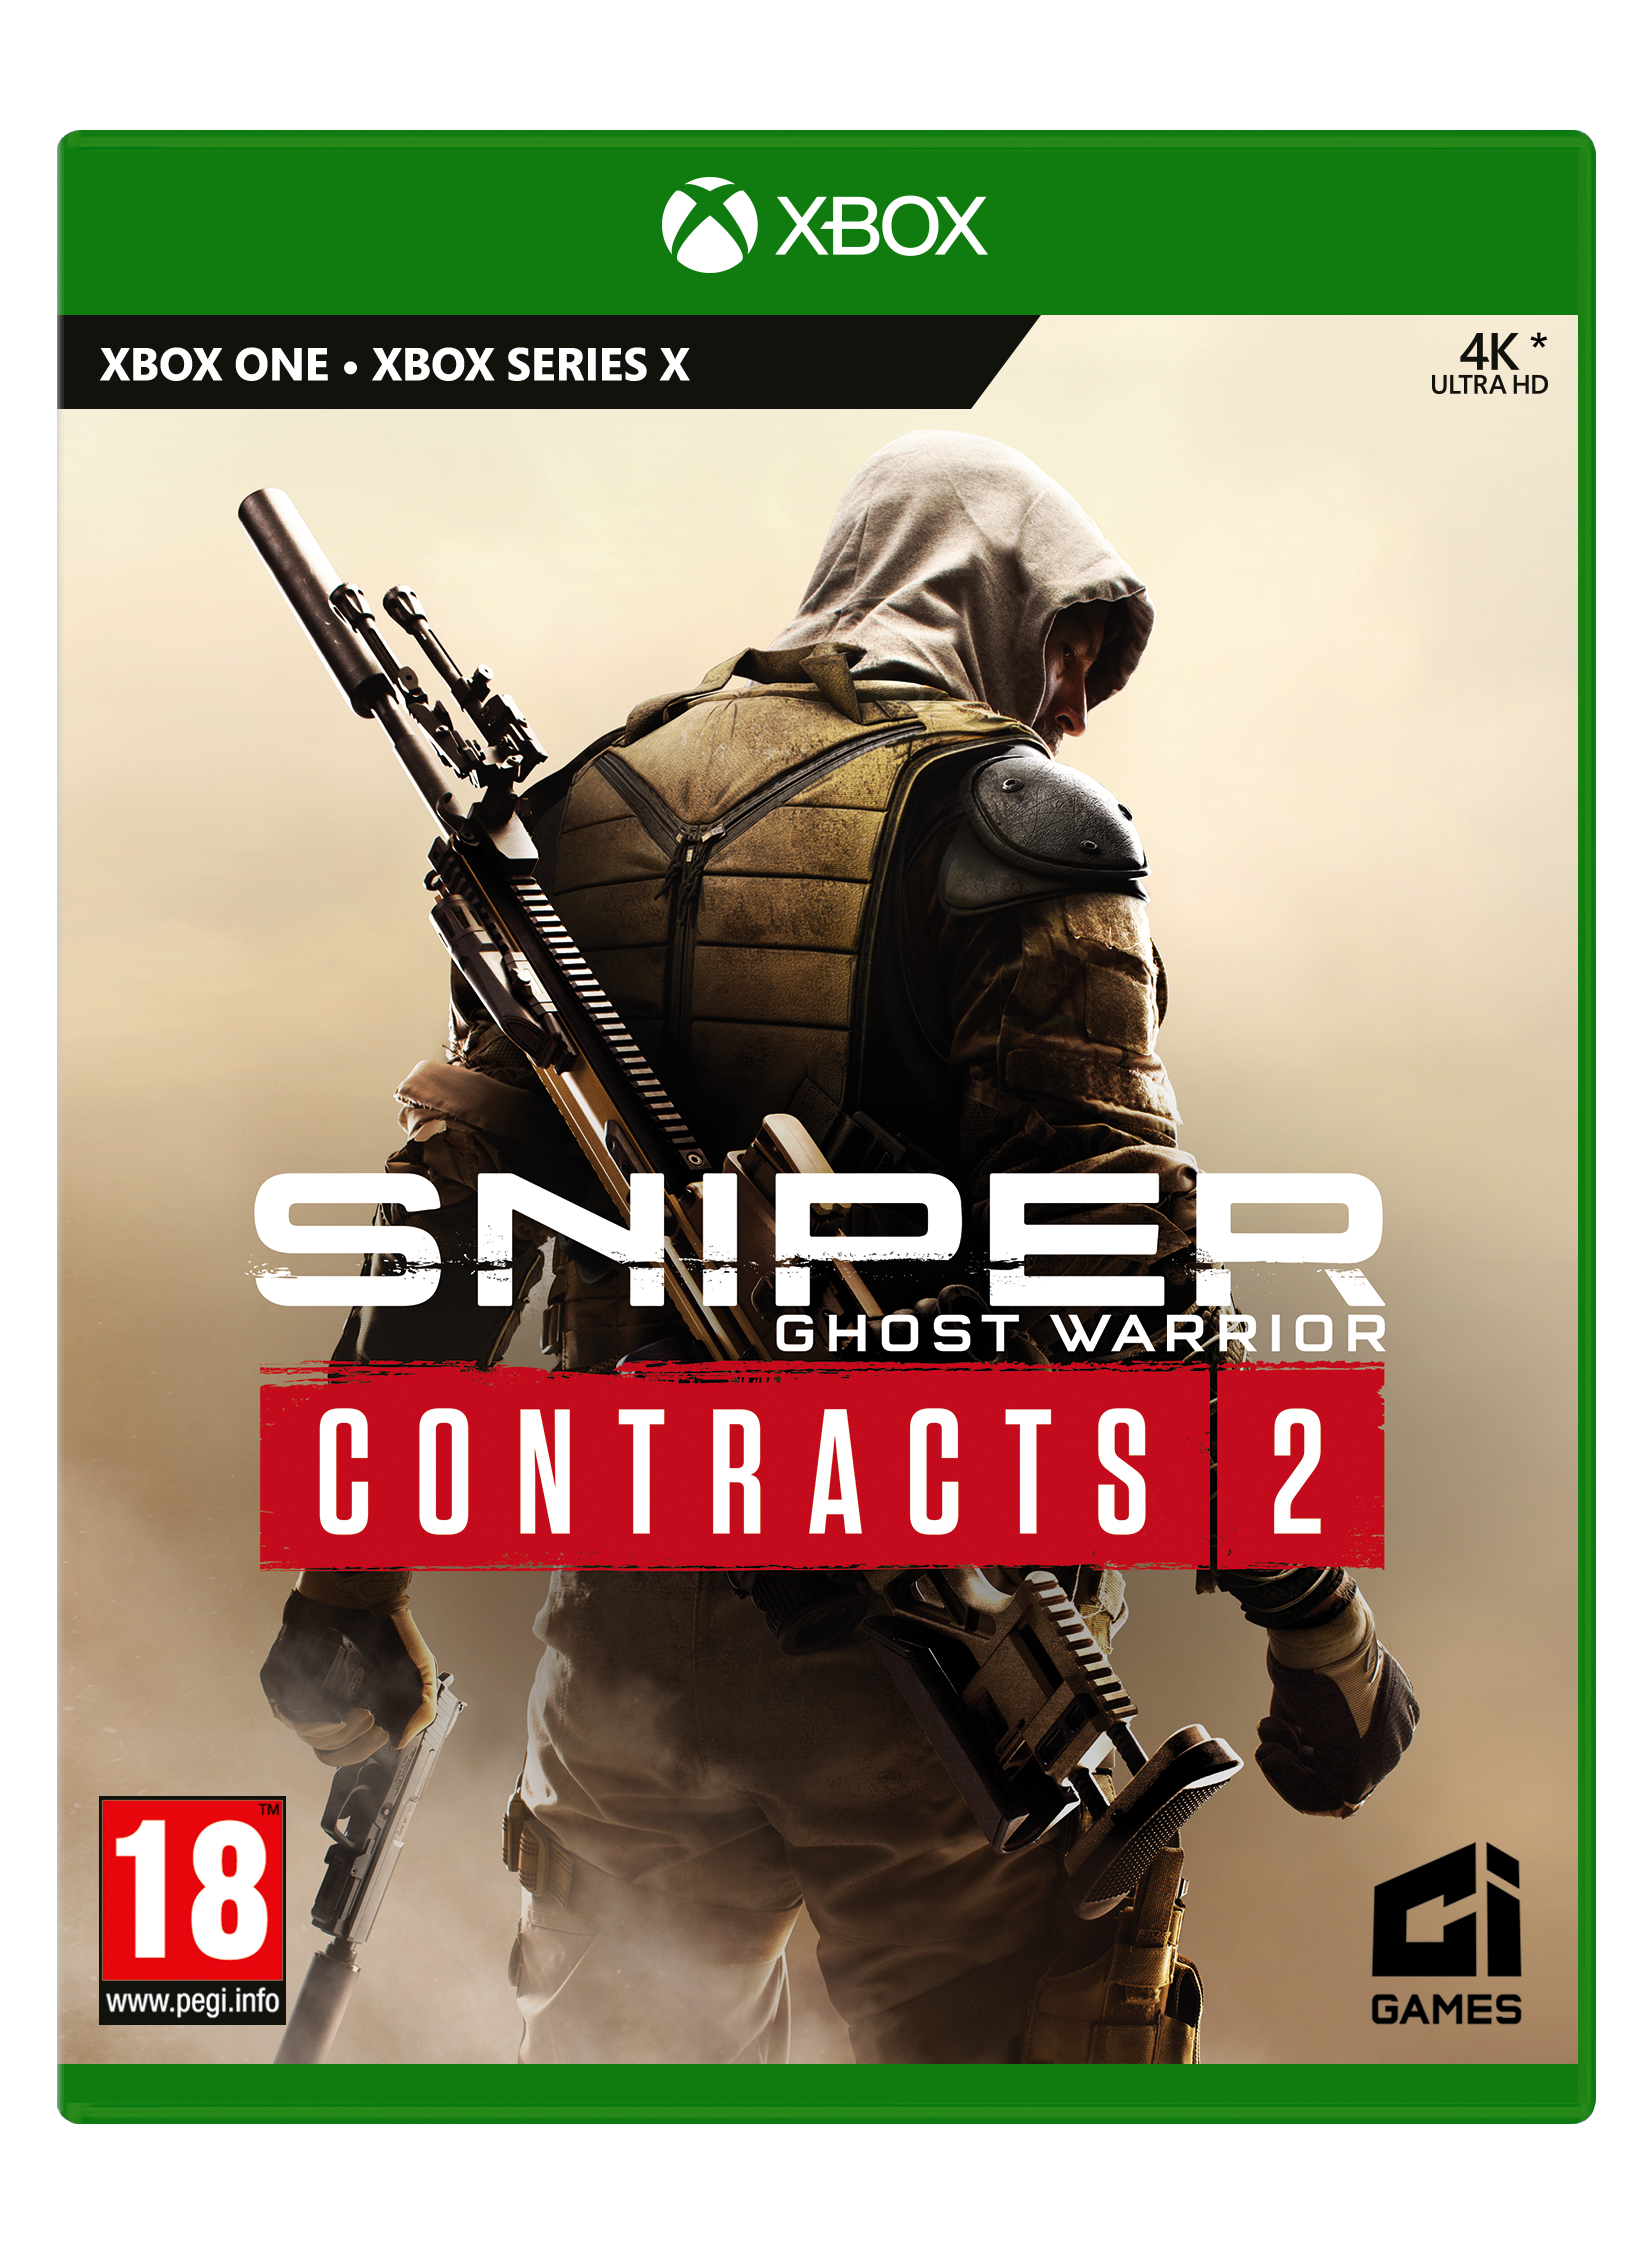 sniper ghost warrior contracts 2 raven